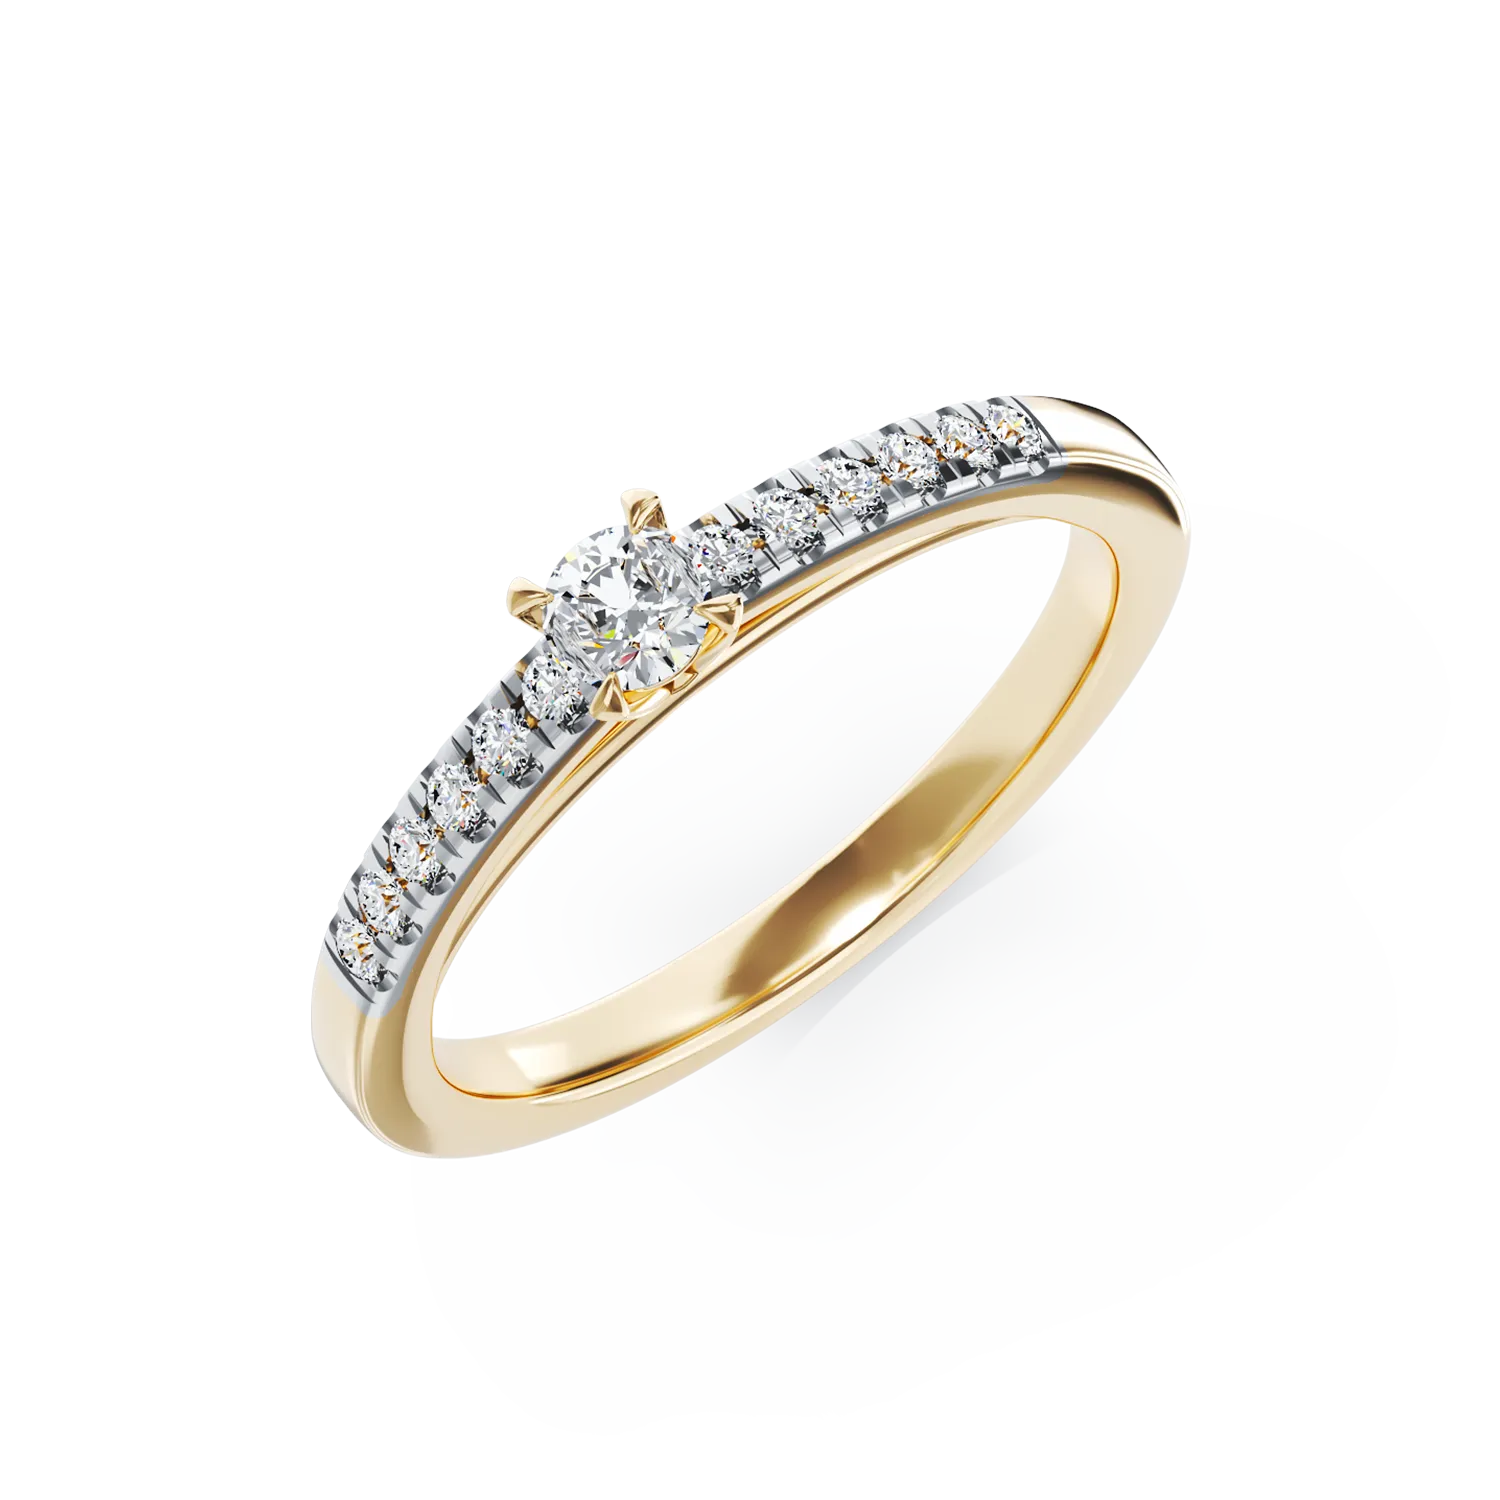 18K yellow gold engagement ring with 0.27ct diamond and 0.13ct diamonds